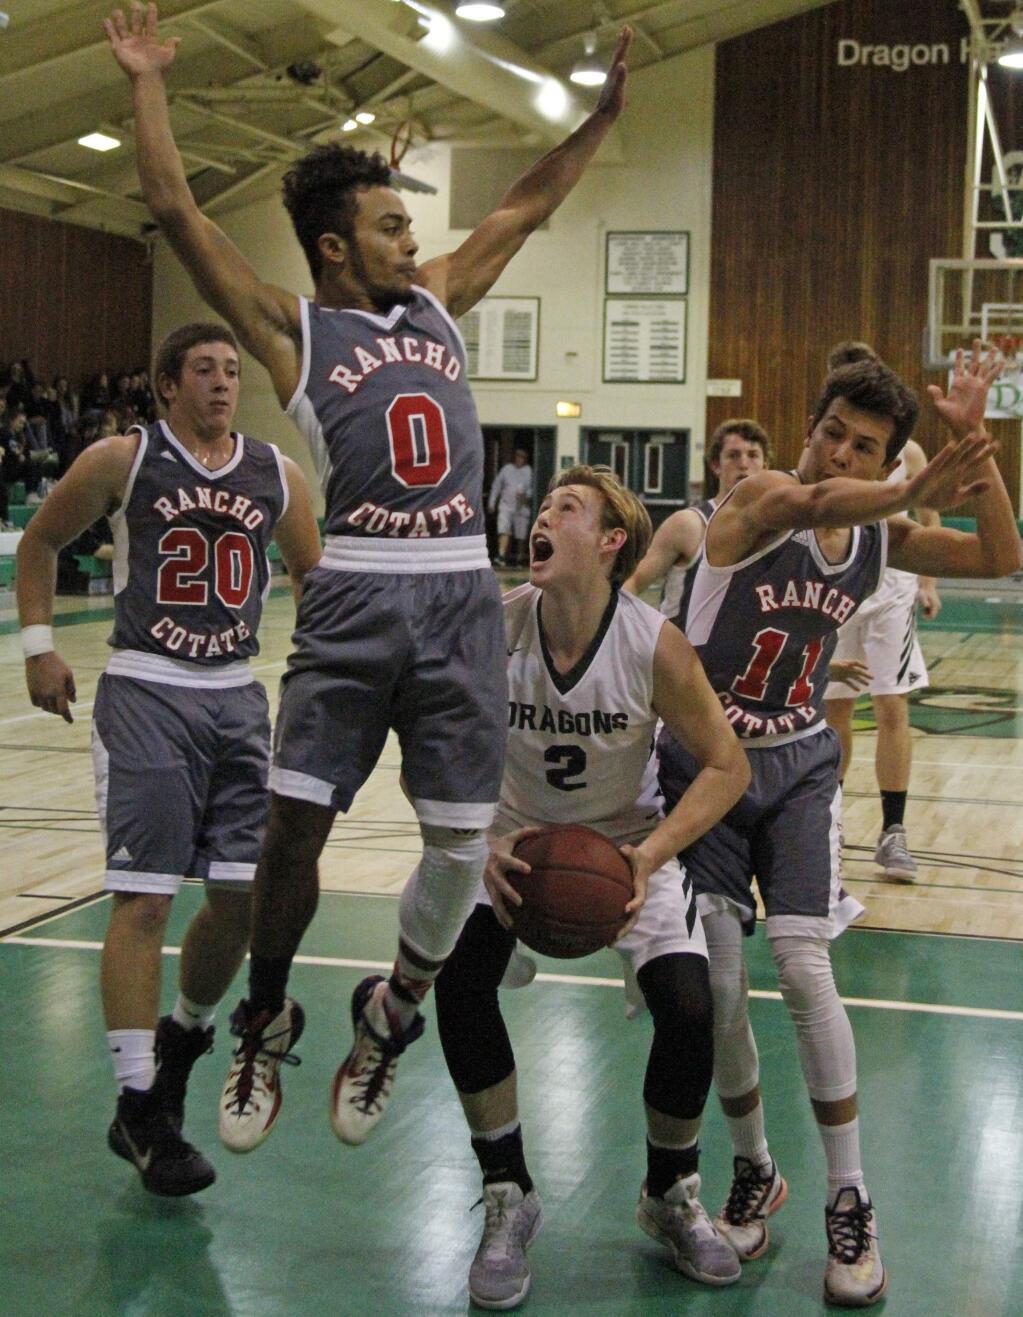 Bill Hoban/Index-TribuneSonoma's Luke Severson looks to put up a shot during Tuesday night's game against Rancho Cotate. The Dragons beat Rancho Cotate, 48-39.